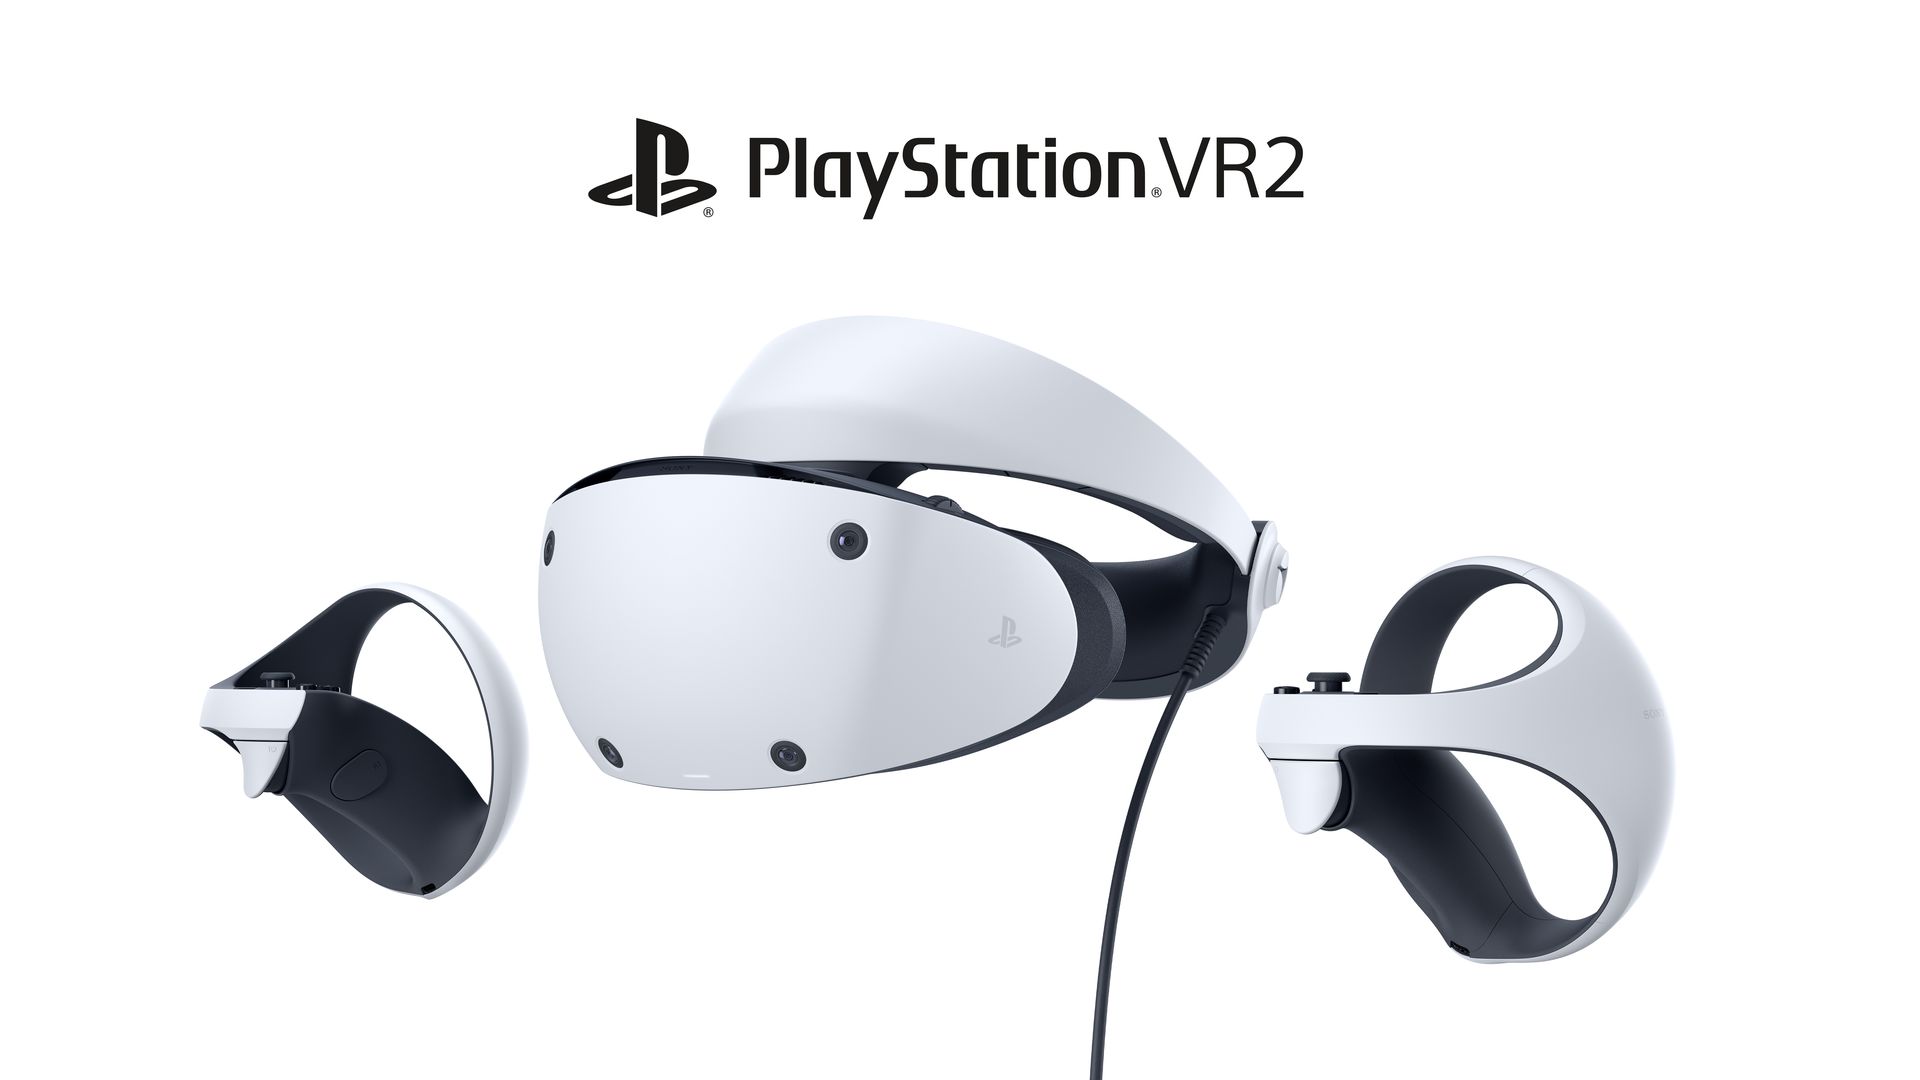 Sony to launch its PSVR 2 headset for $550